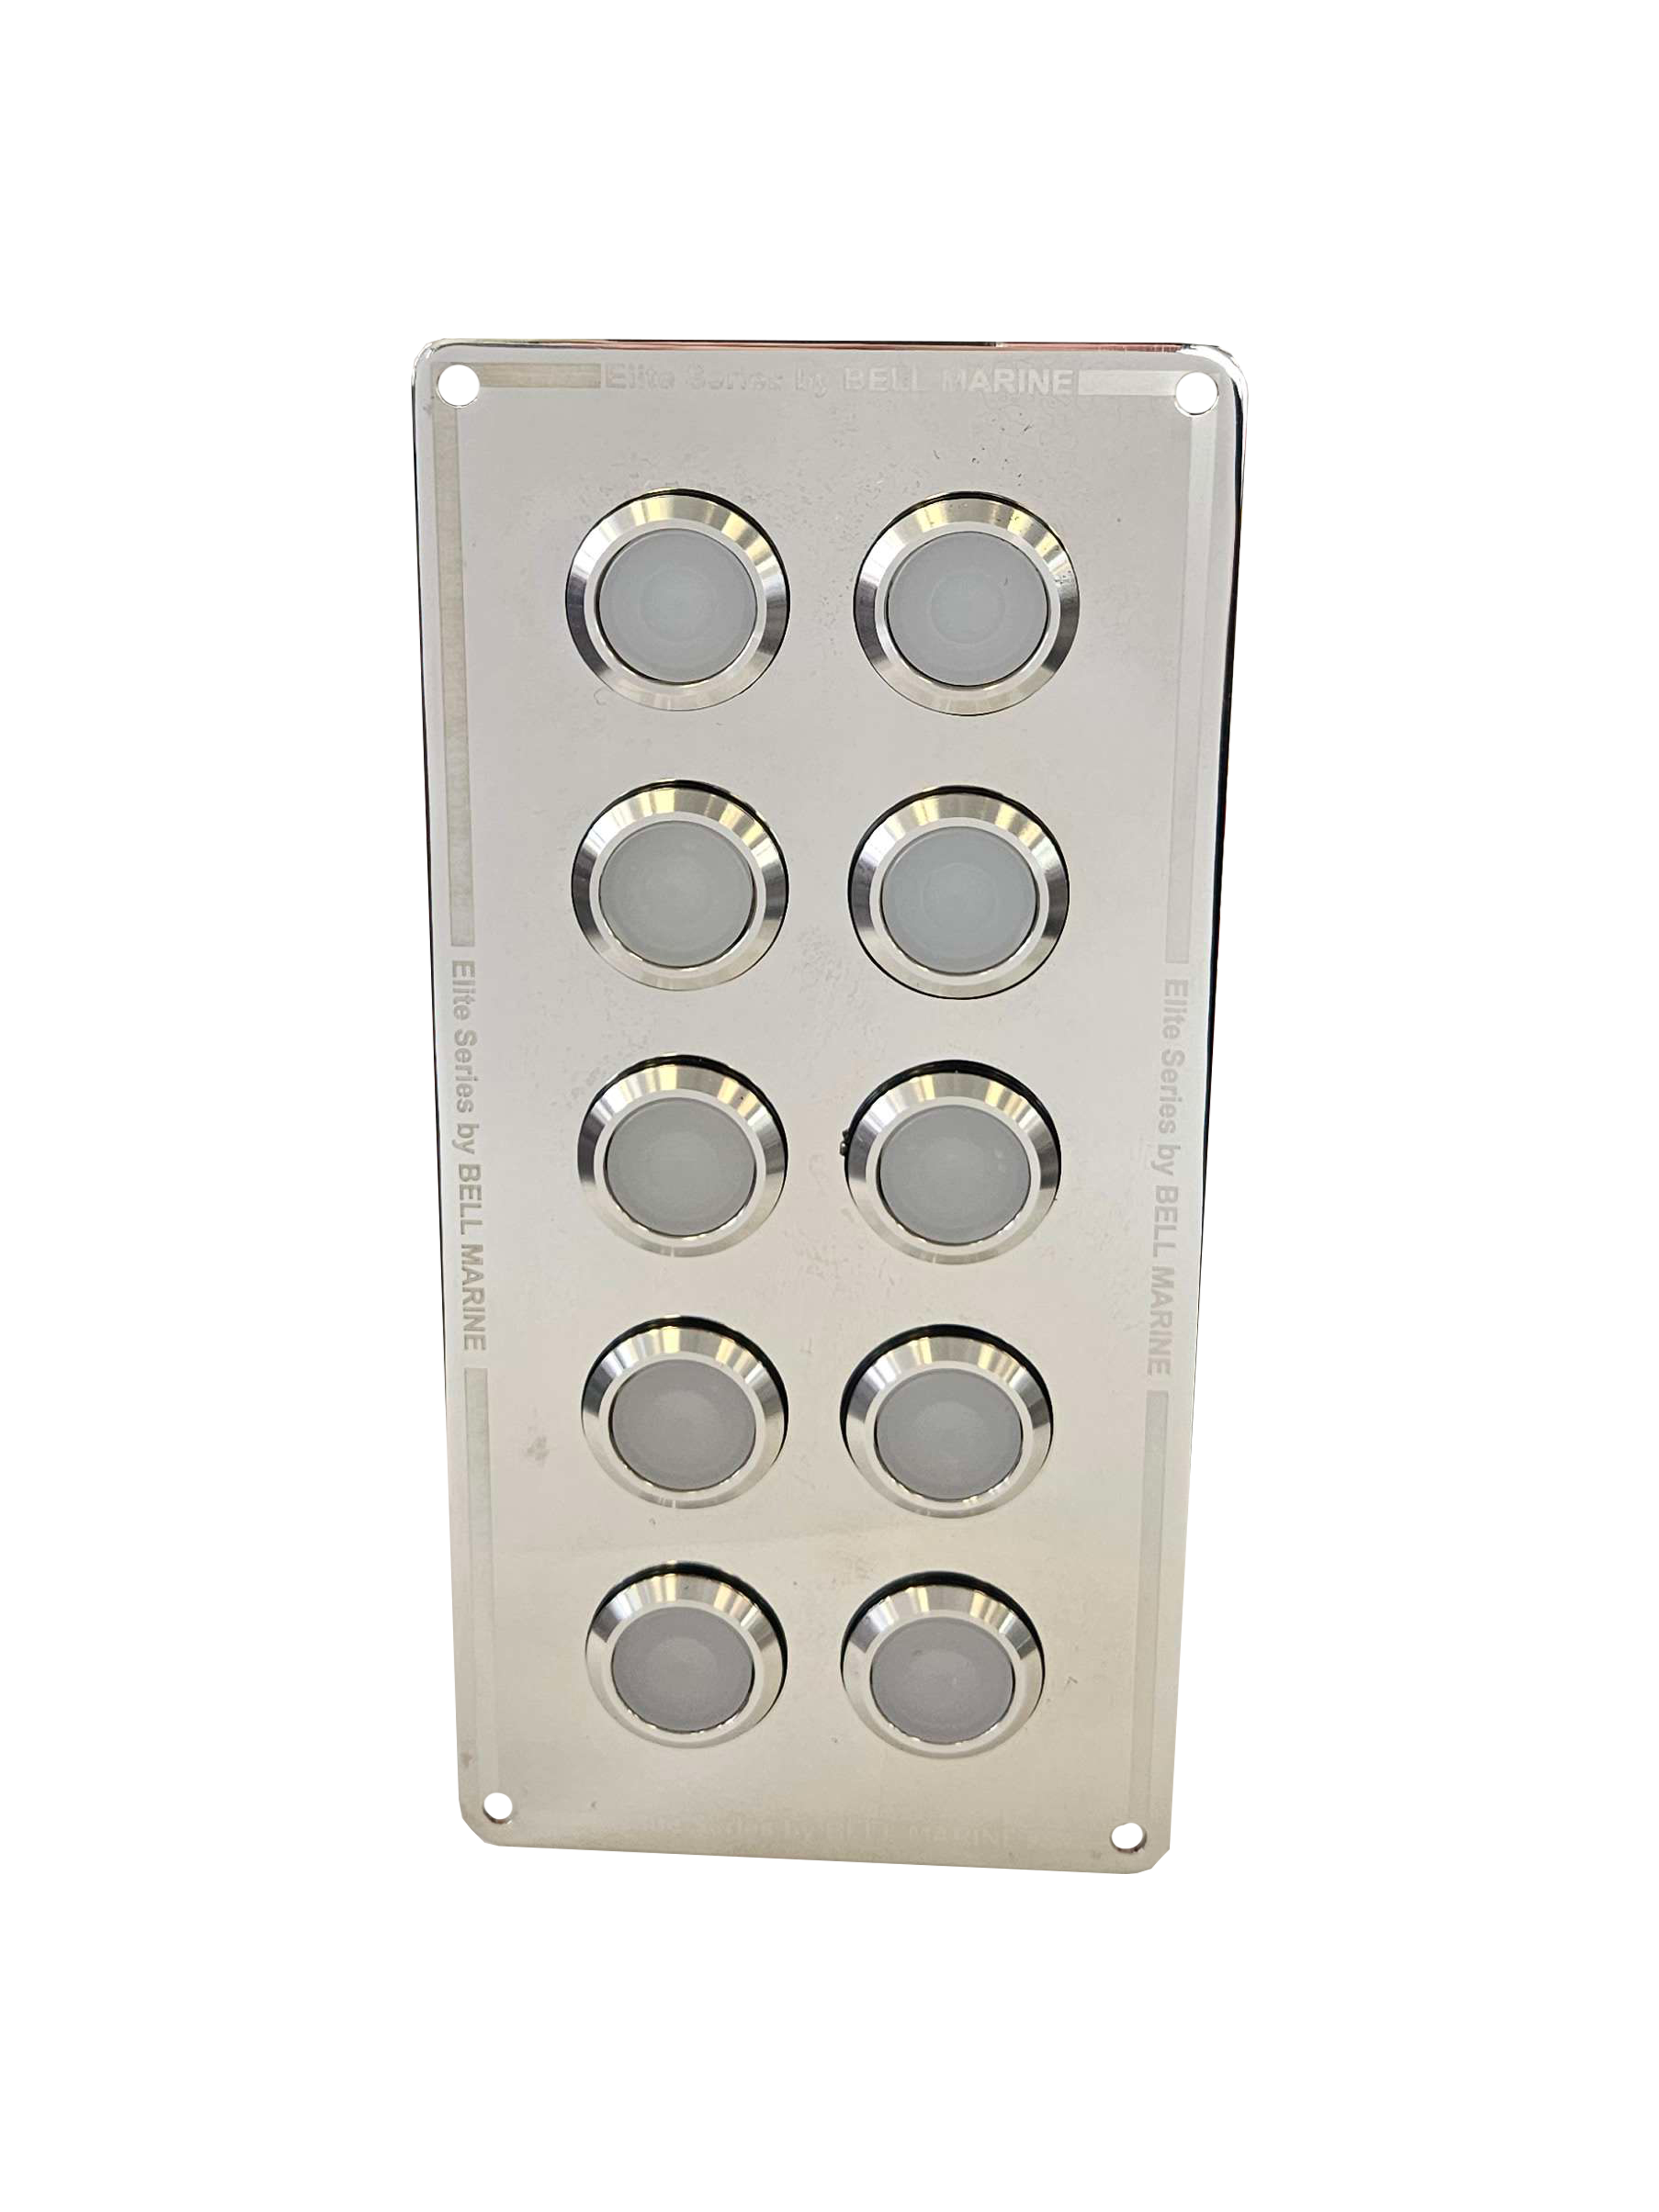 10 gang stainless steel switch panel with 20A backlit switches